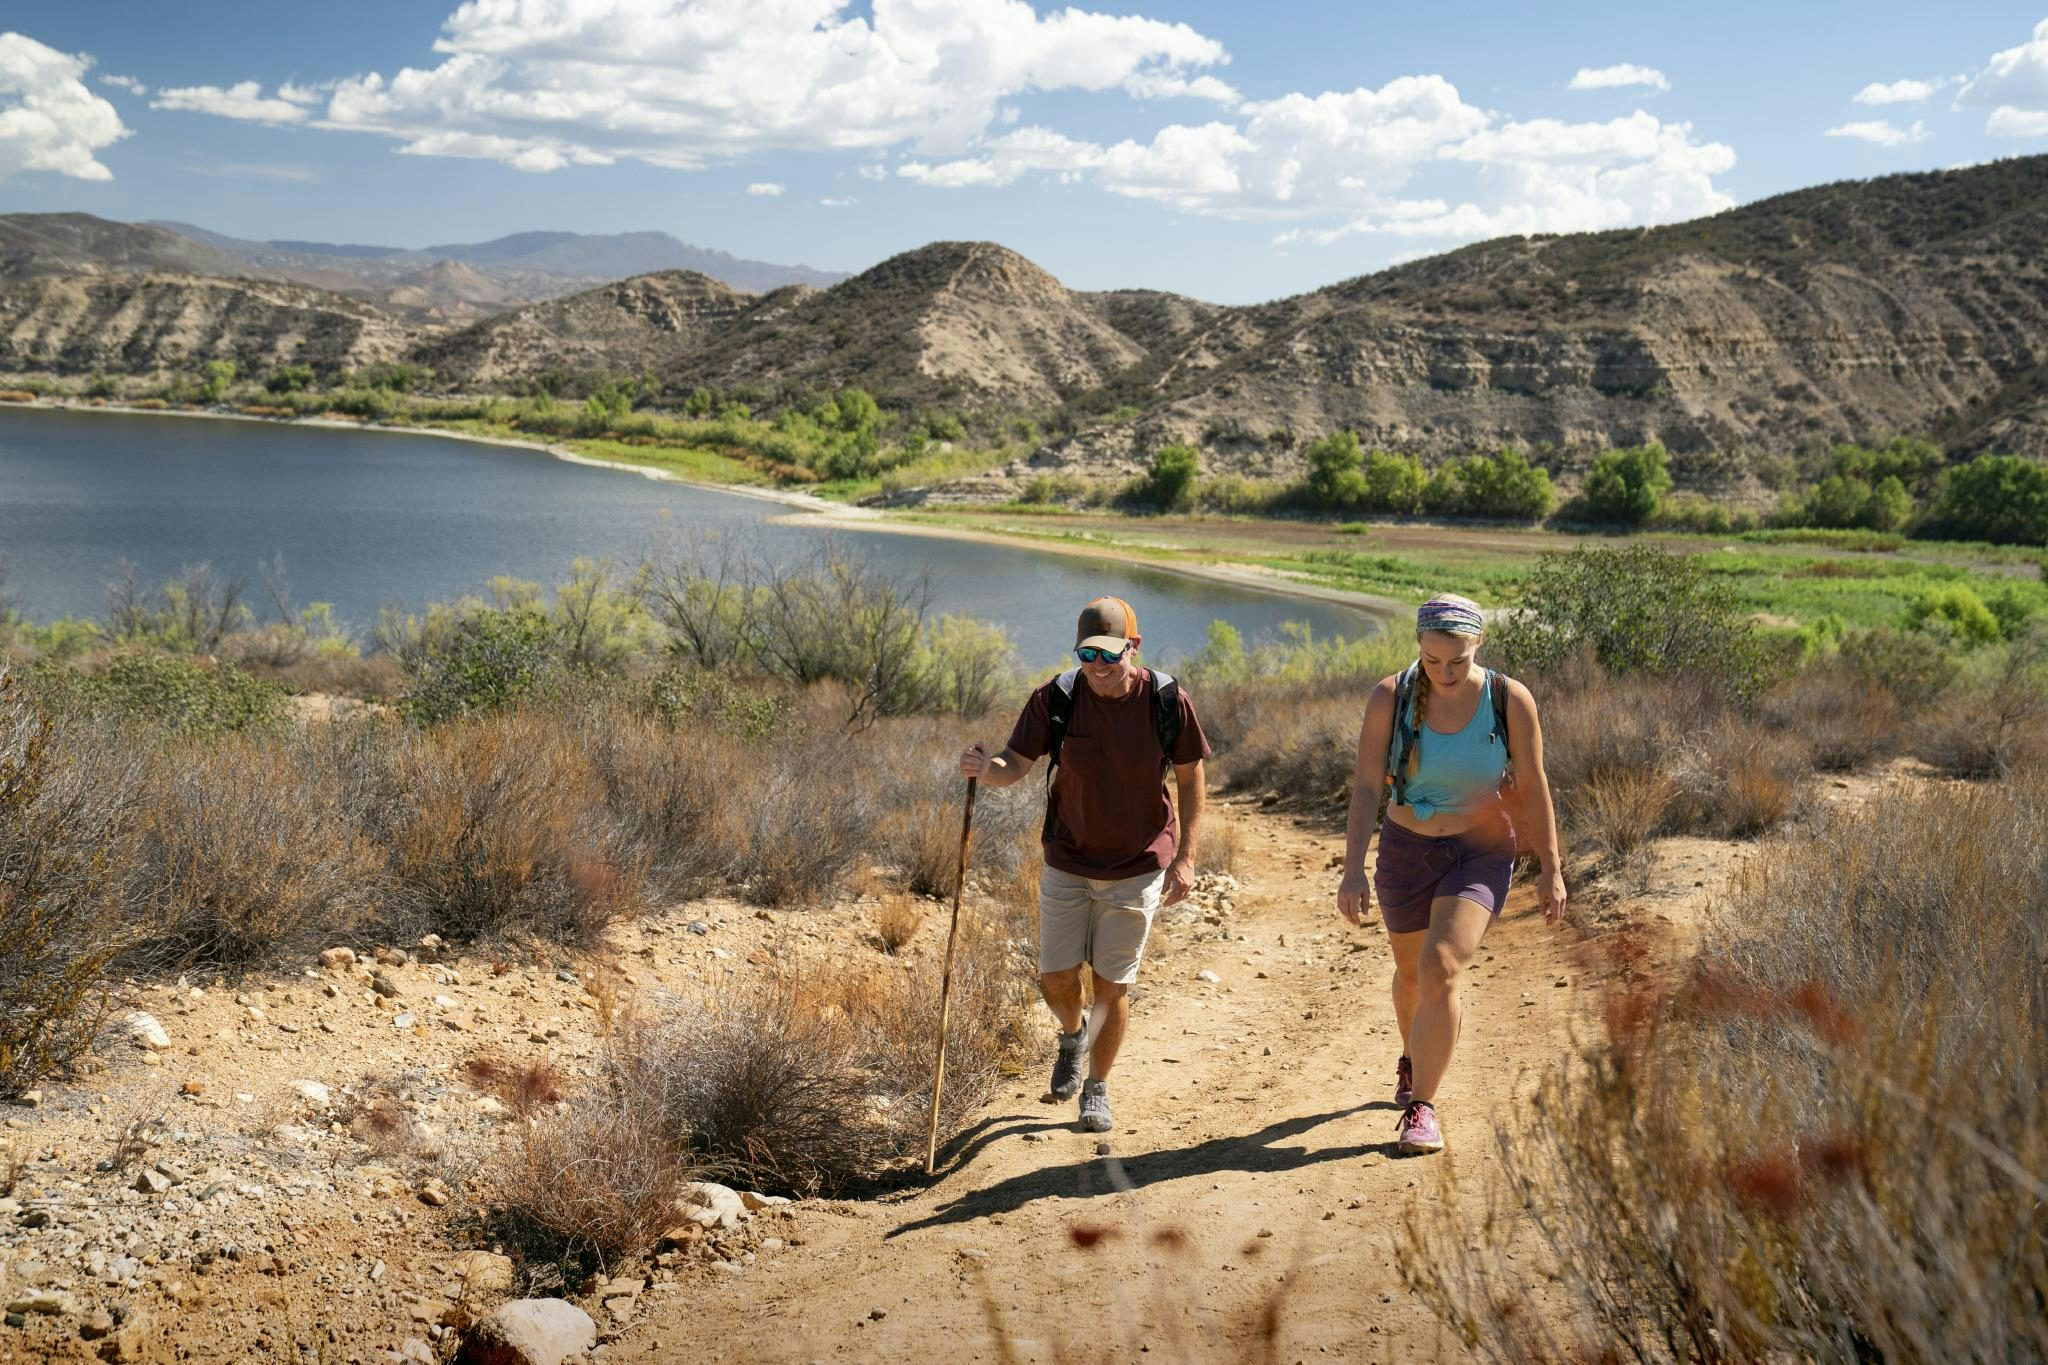 5 Best Trails & Hiking Spots in Temecula Valley, California